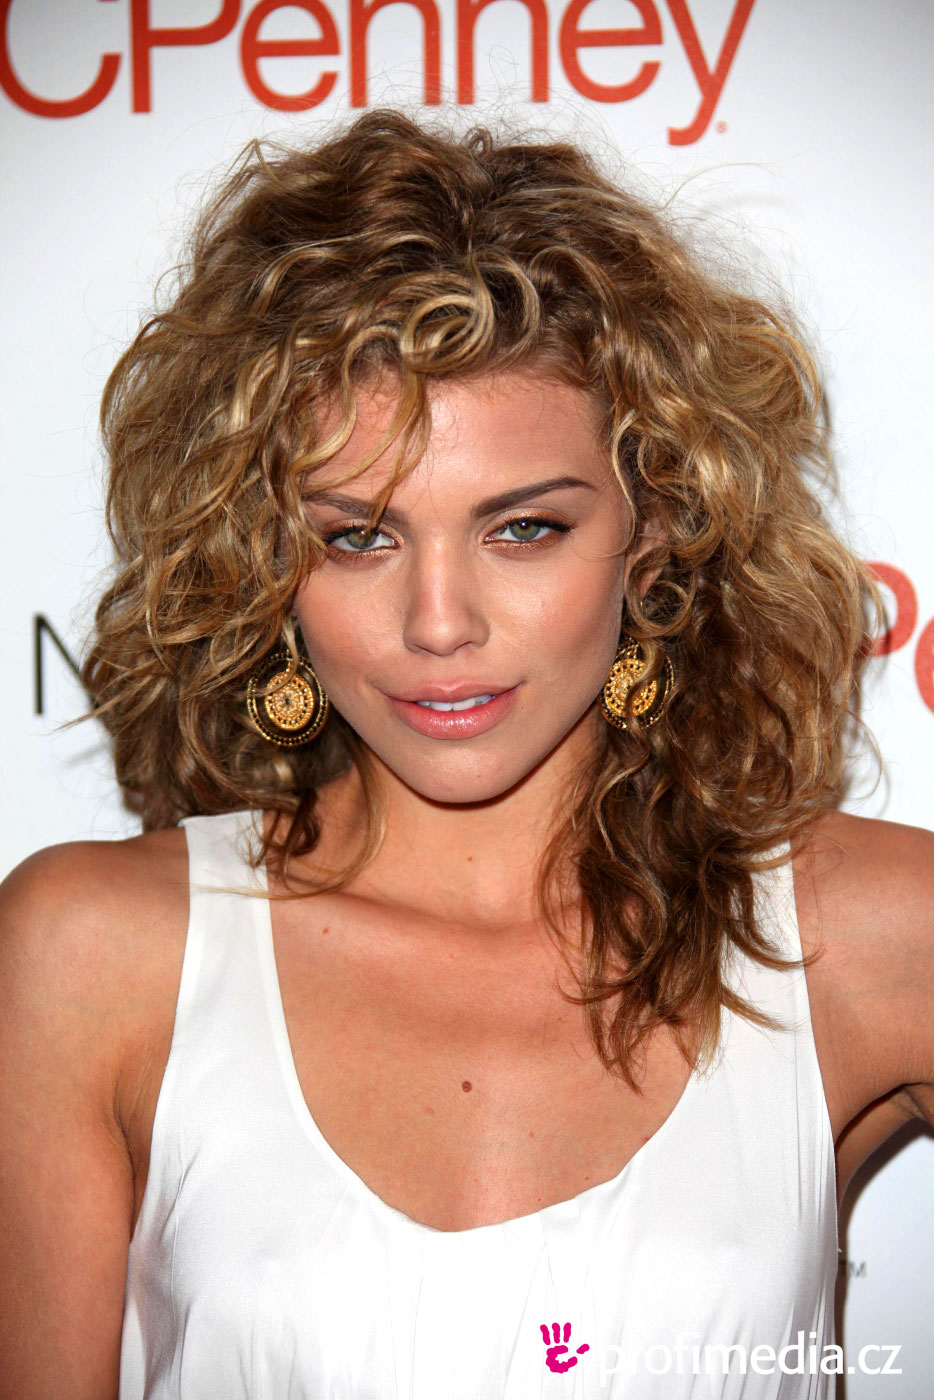 AnnaLynne McCord - Images Gallery